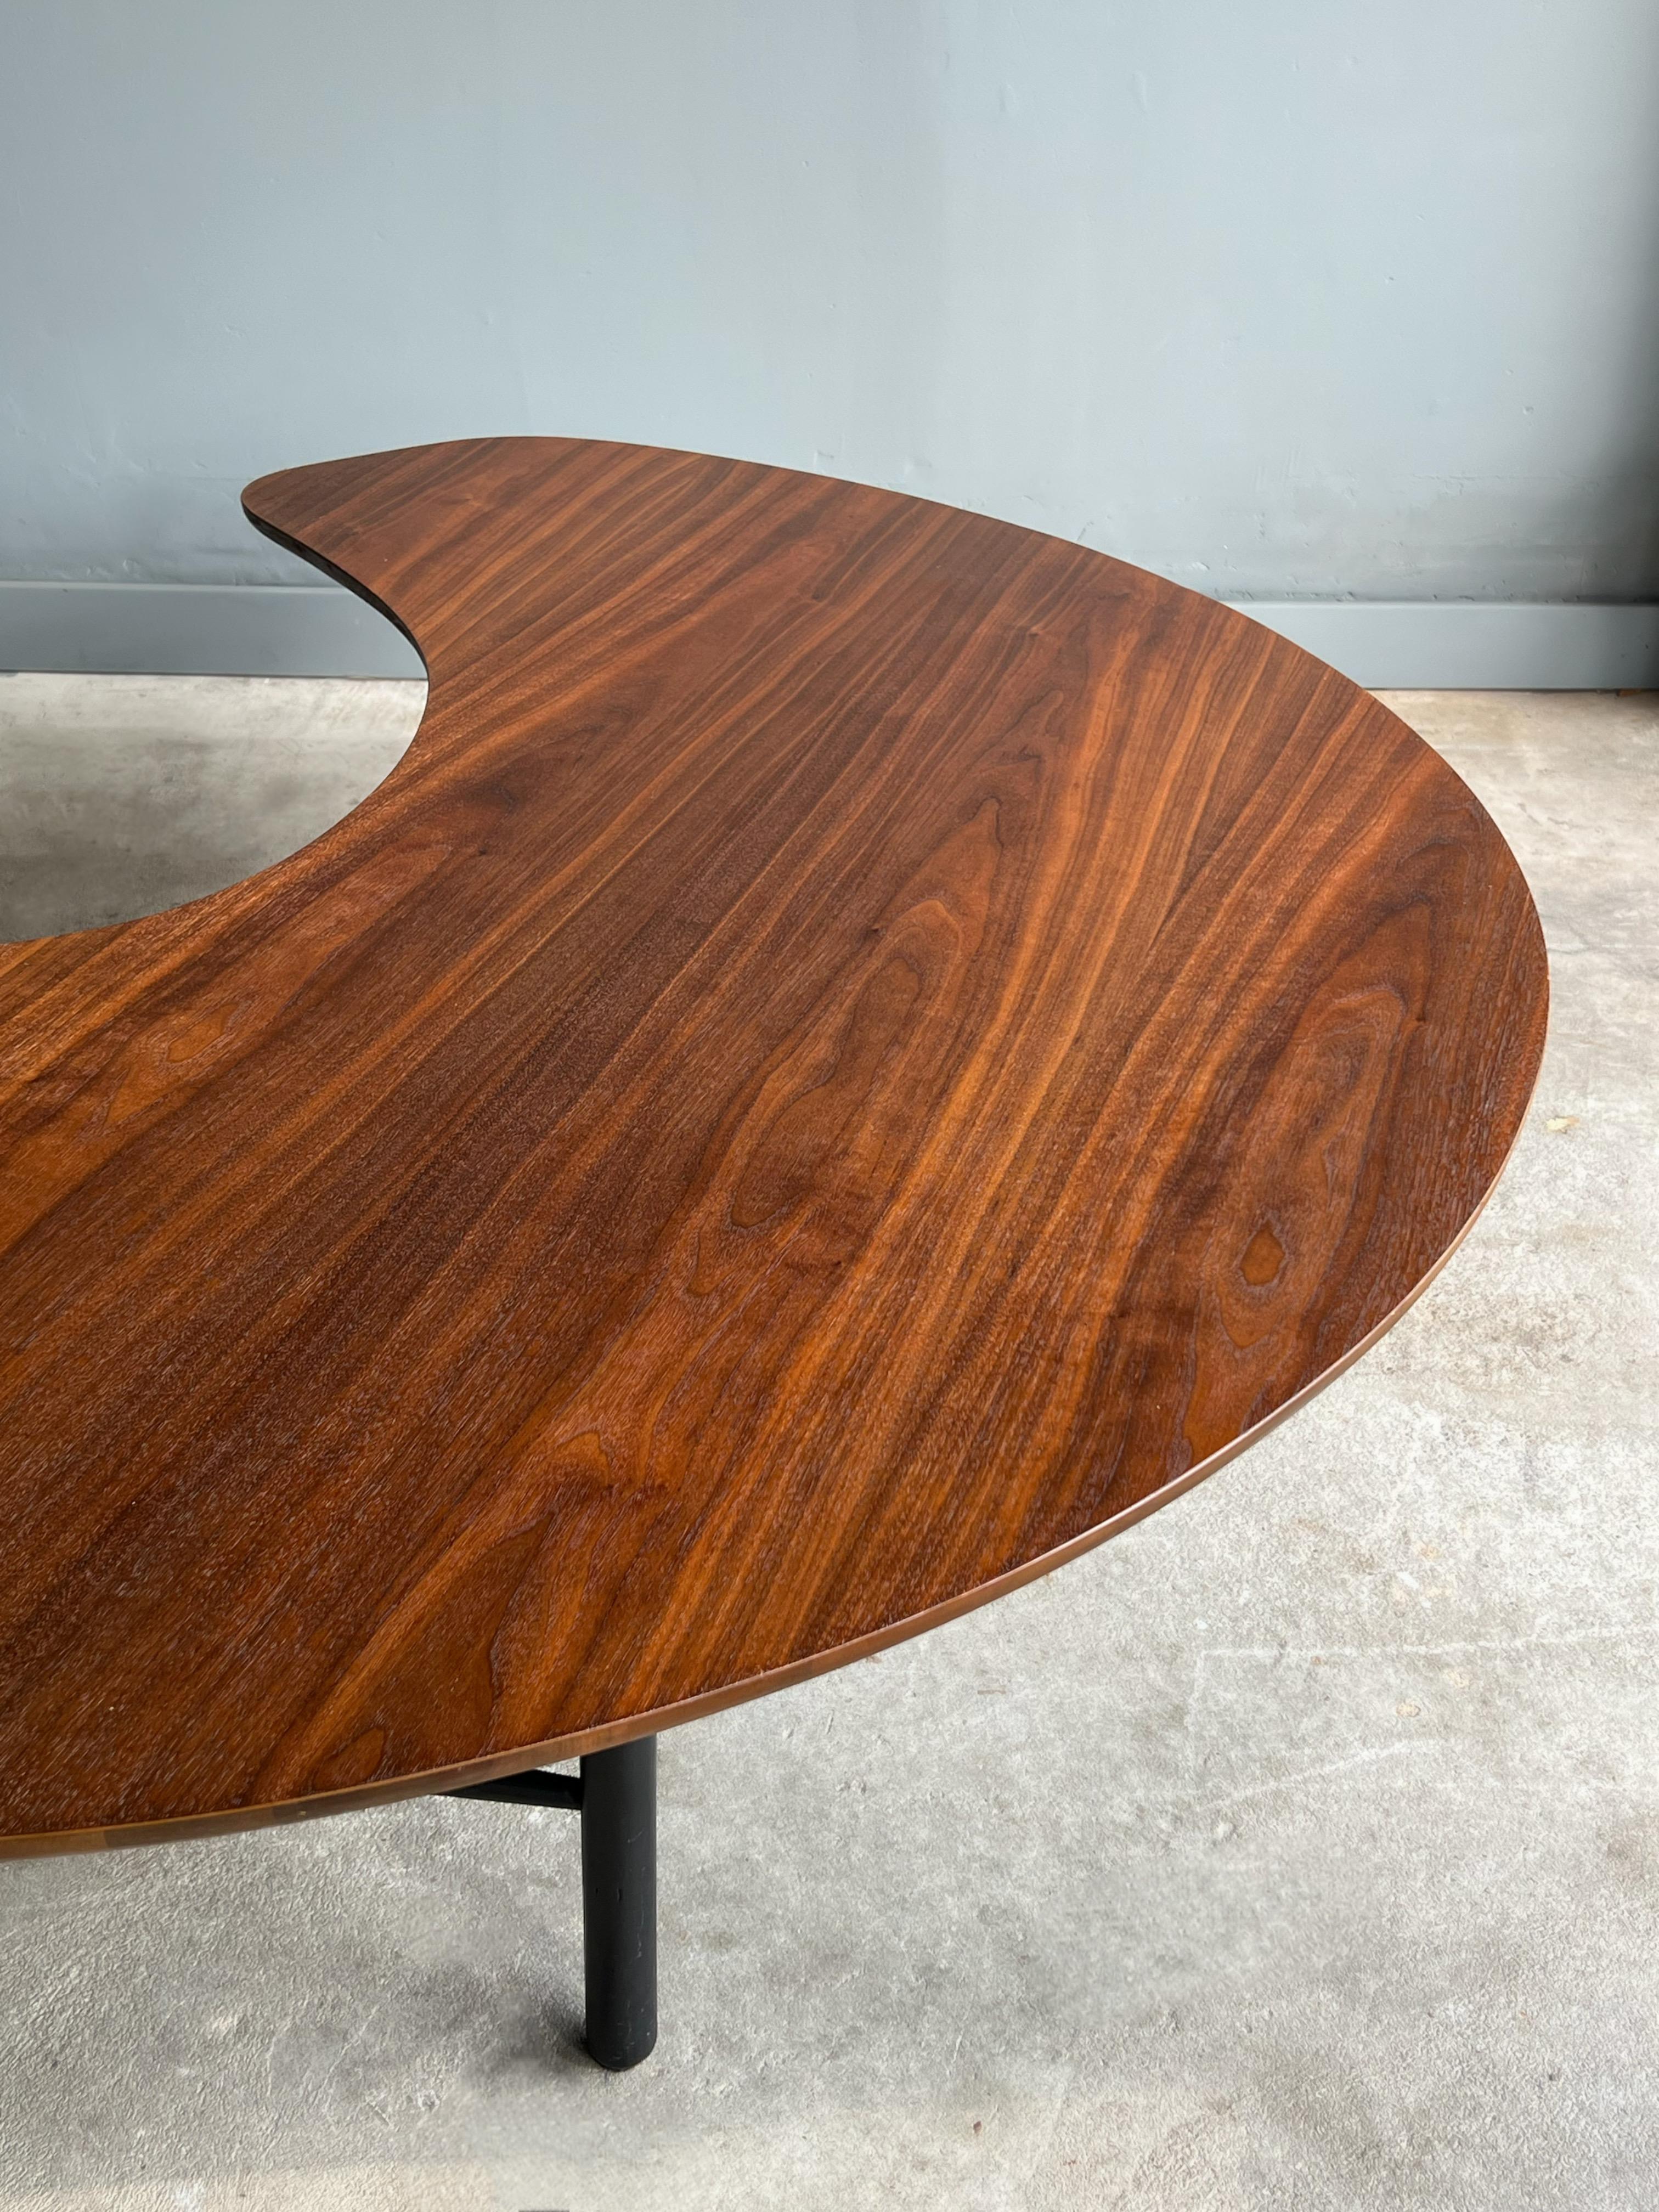 crescent moon coffee table